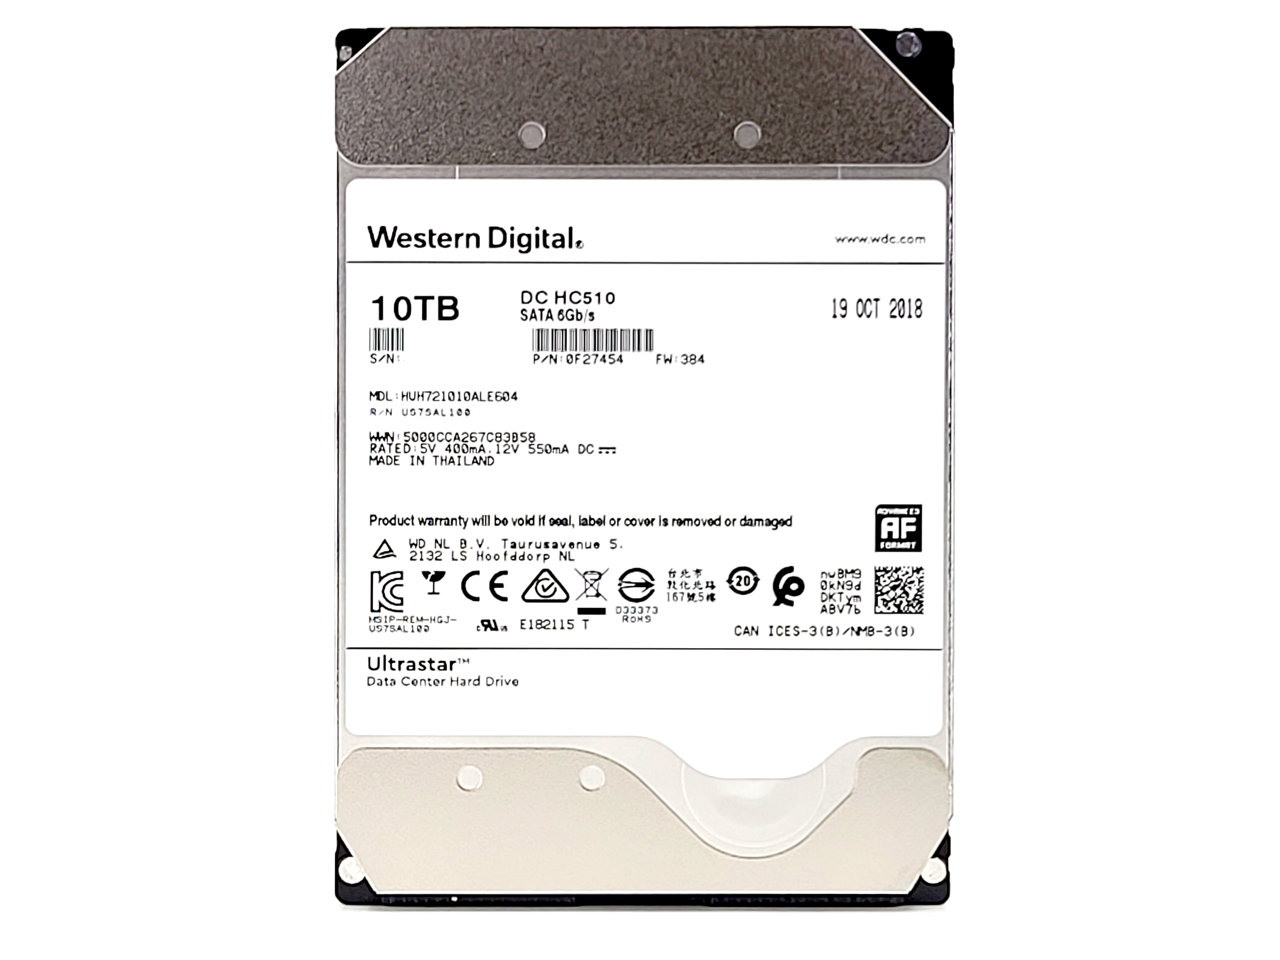 HGST DC HC510/He10 HUH721010ALE604 10TB 7200 RPM 512e SATA 6Gb/s 3.5-Inch Enterprise HDD Power-Disable Hard Drive